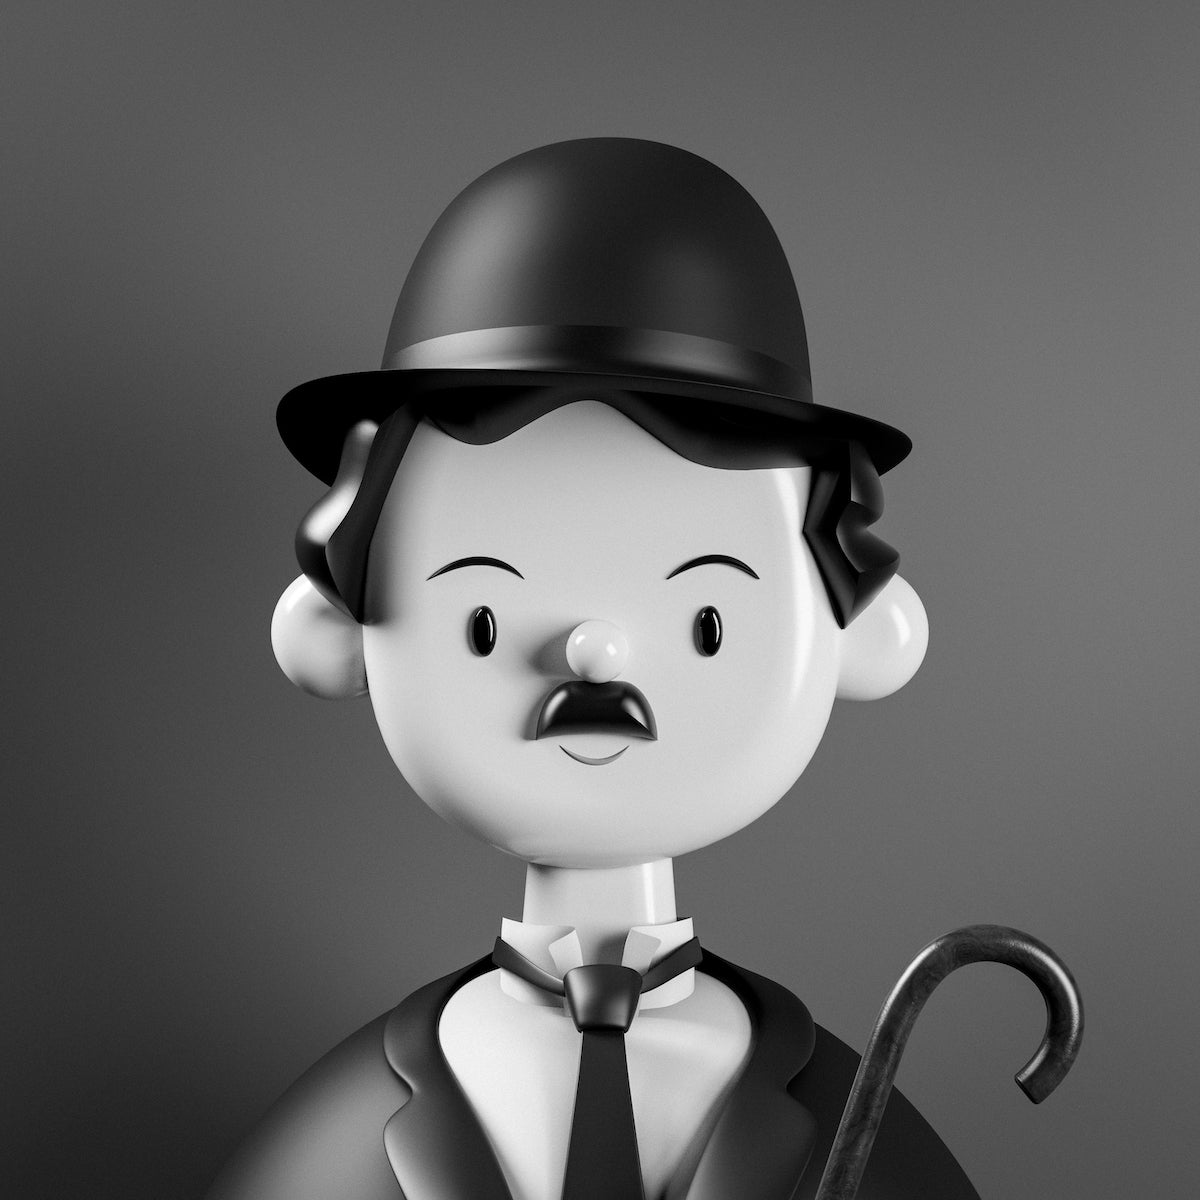 Charlie Toy Face by Amrit Pal Singh